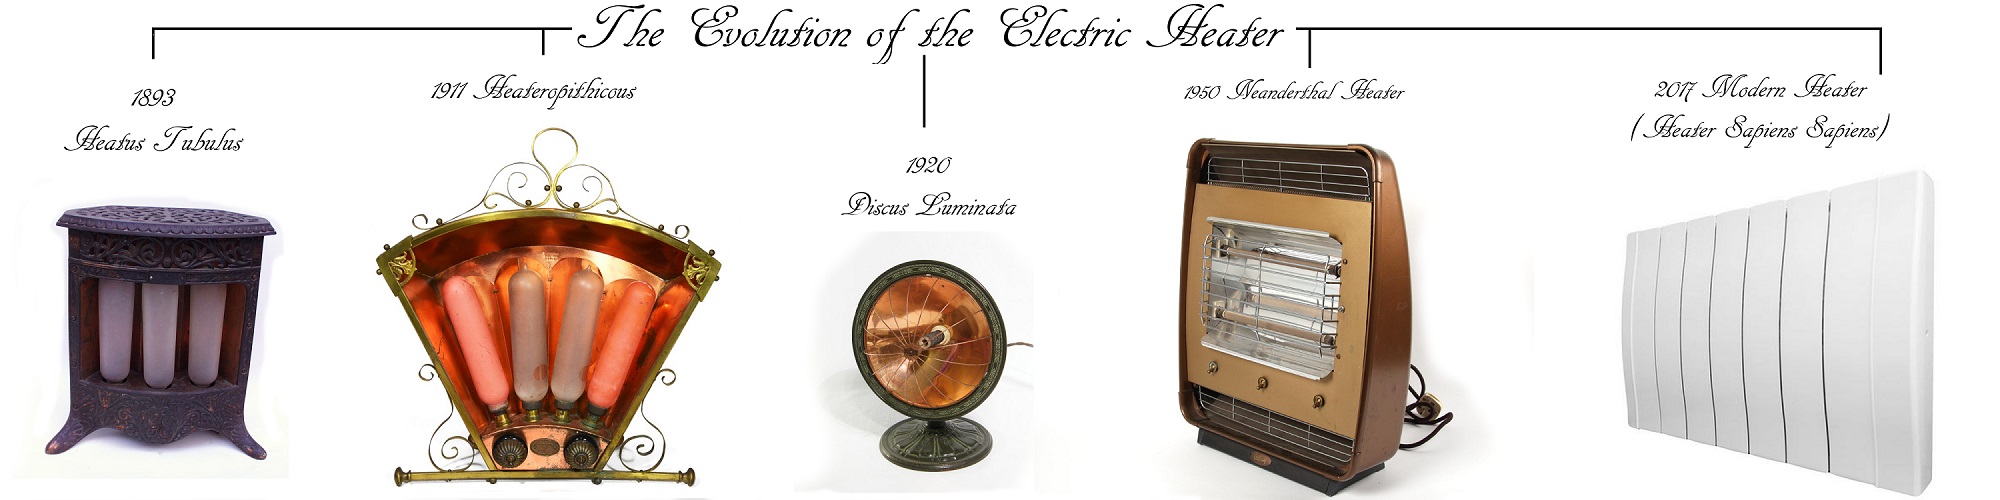 Evolution of the electric heater